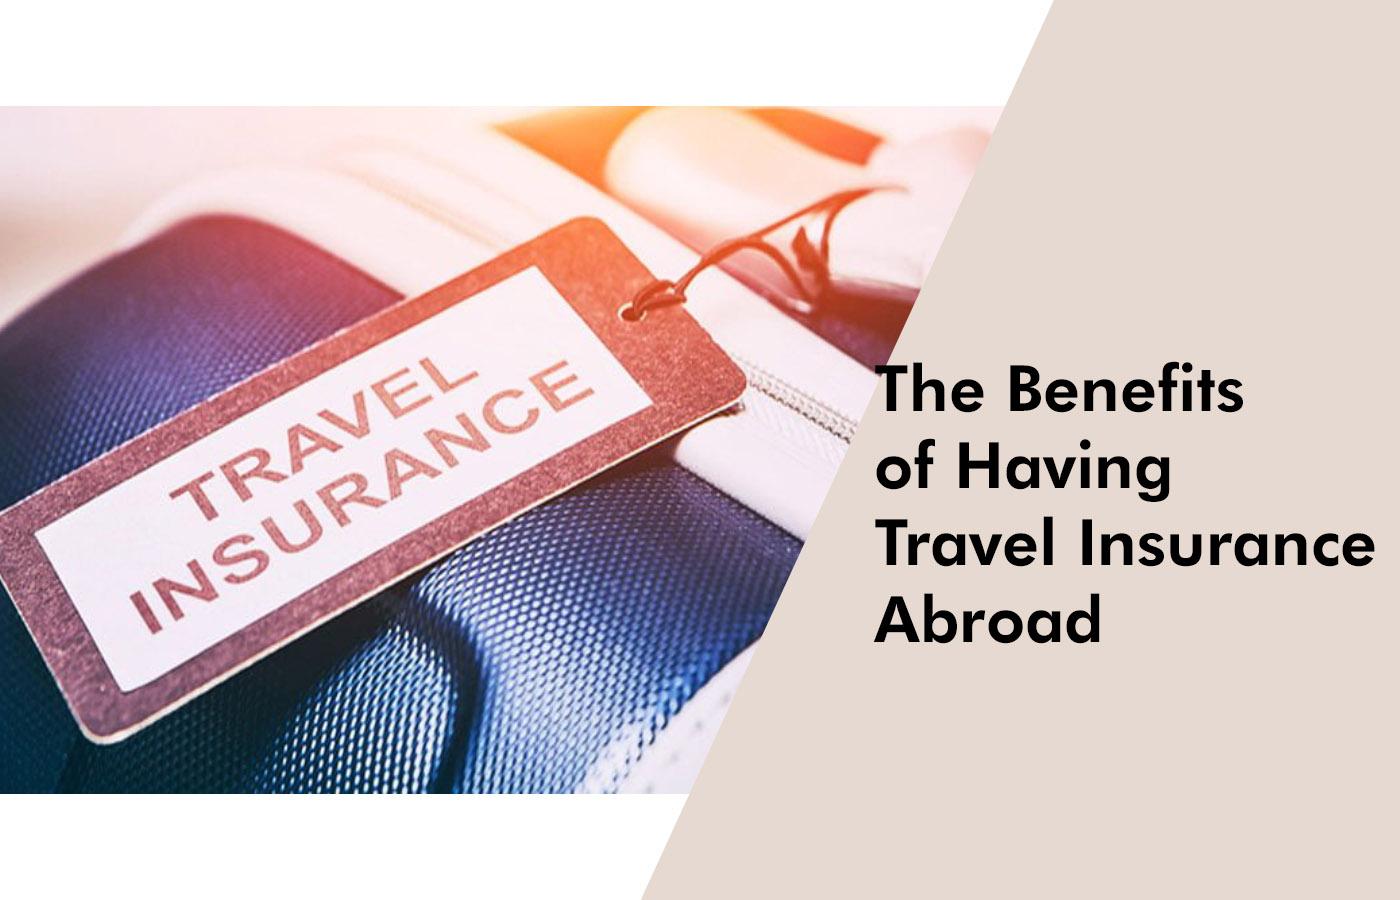 The Benefits of Having Travel Insurance Abroad